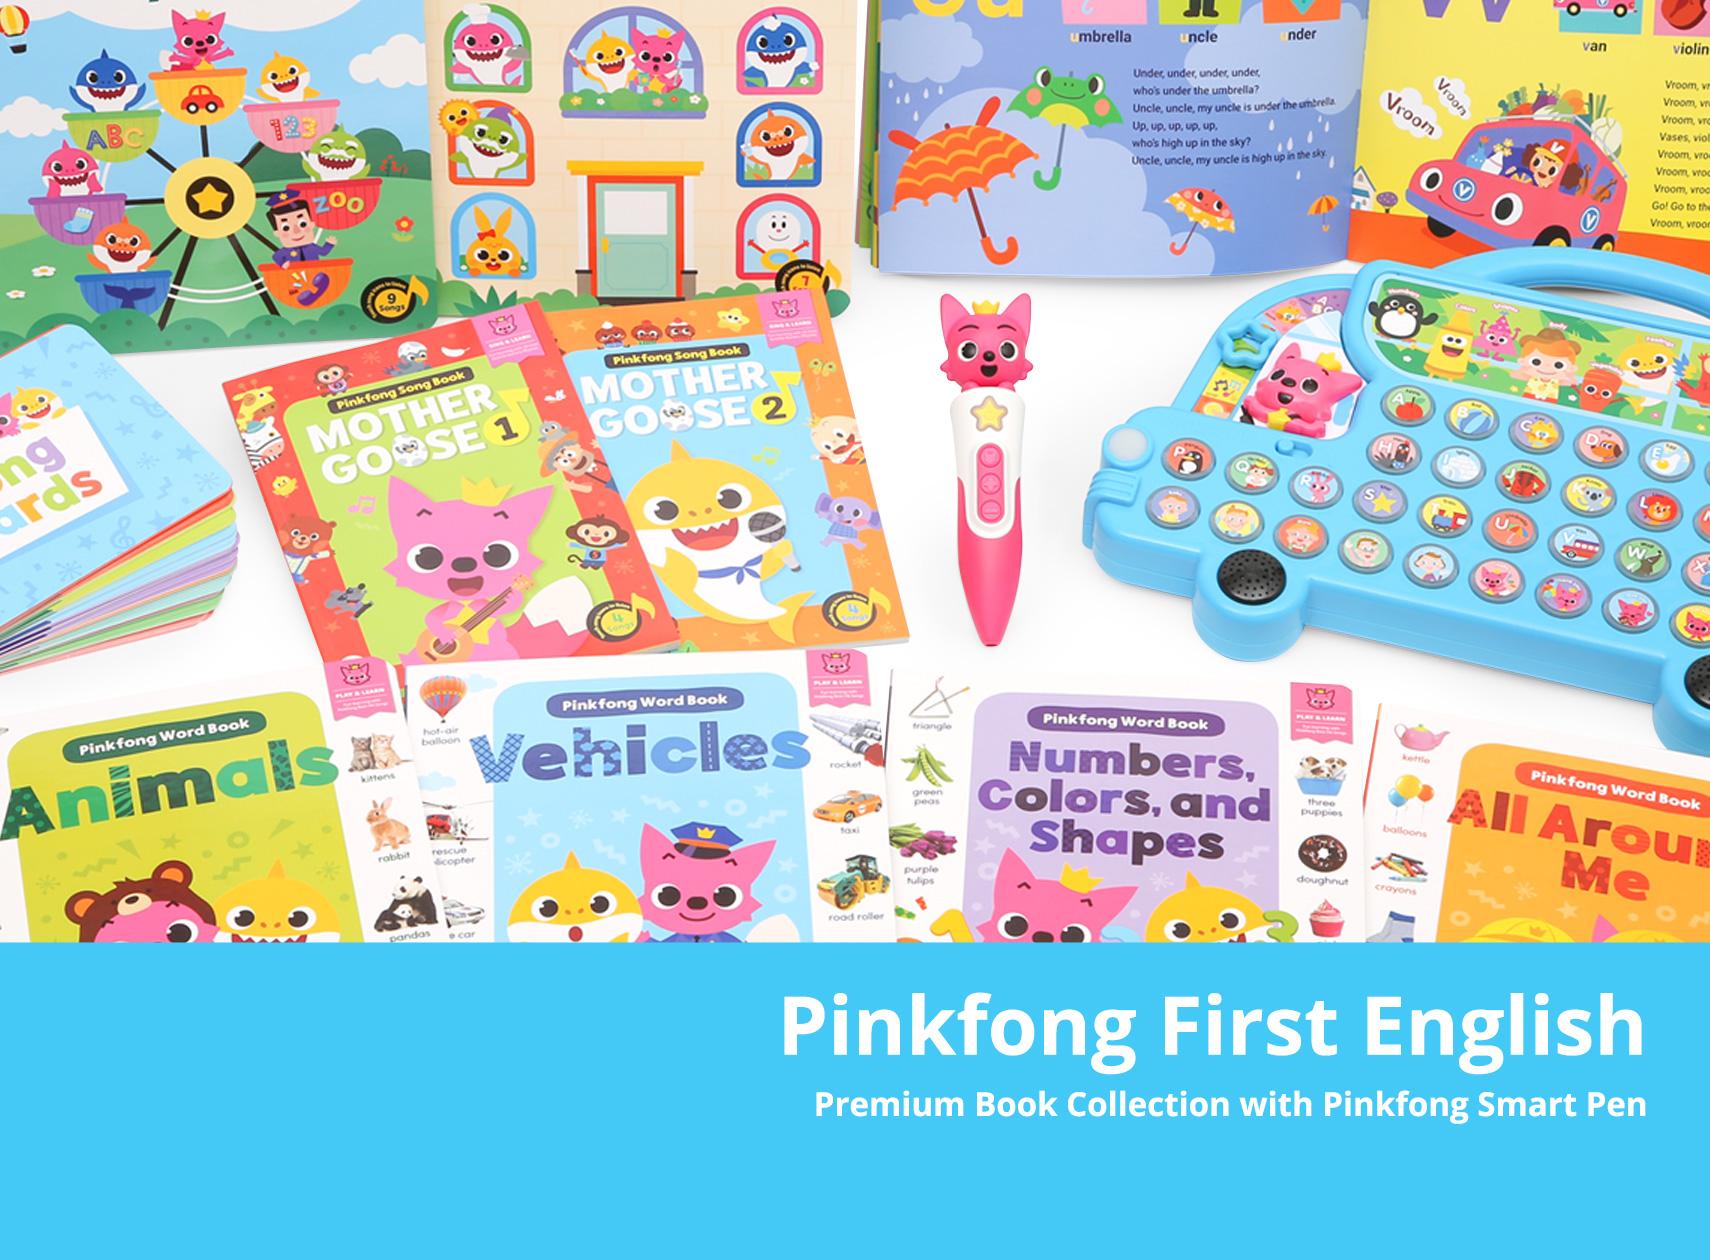 Pinkfong First English Premium Book Collection with Pinkfong Smart Pen